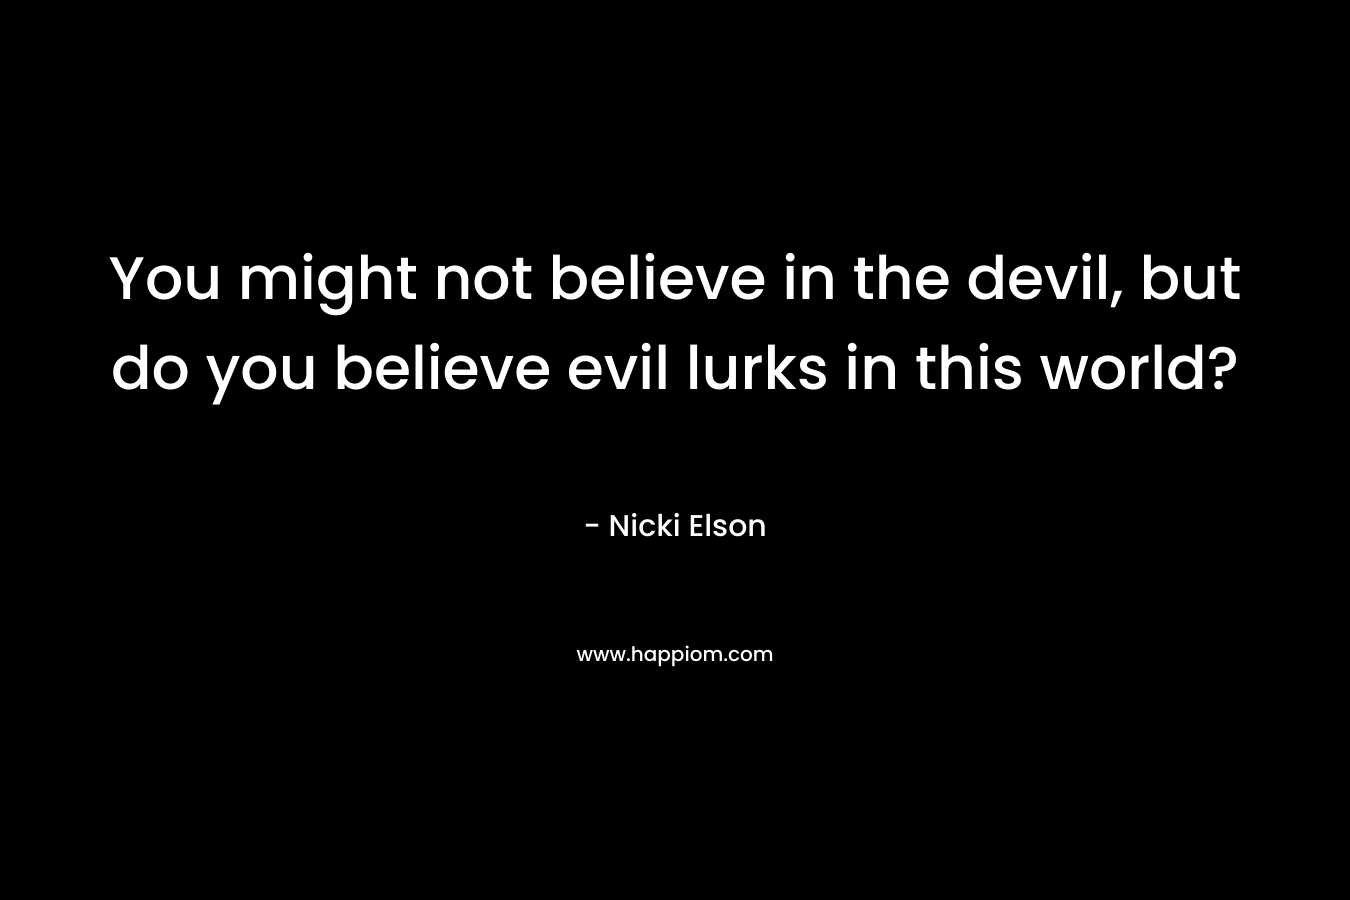 You might not believe in the devil, but do you believe evil lurks in this world? – Nicki Elson